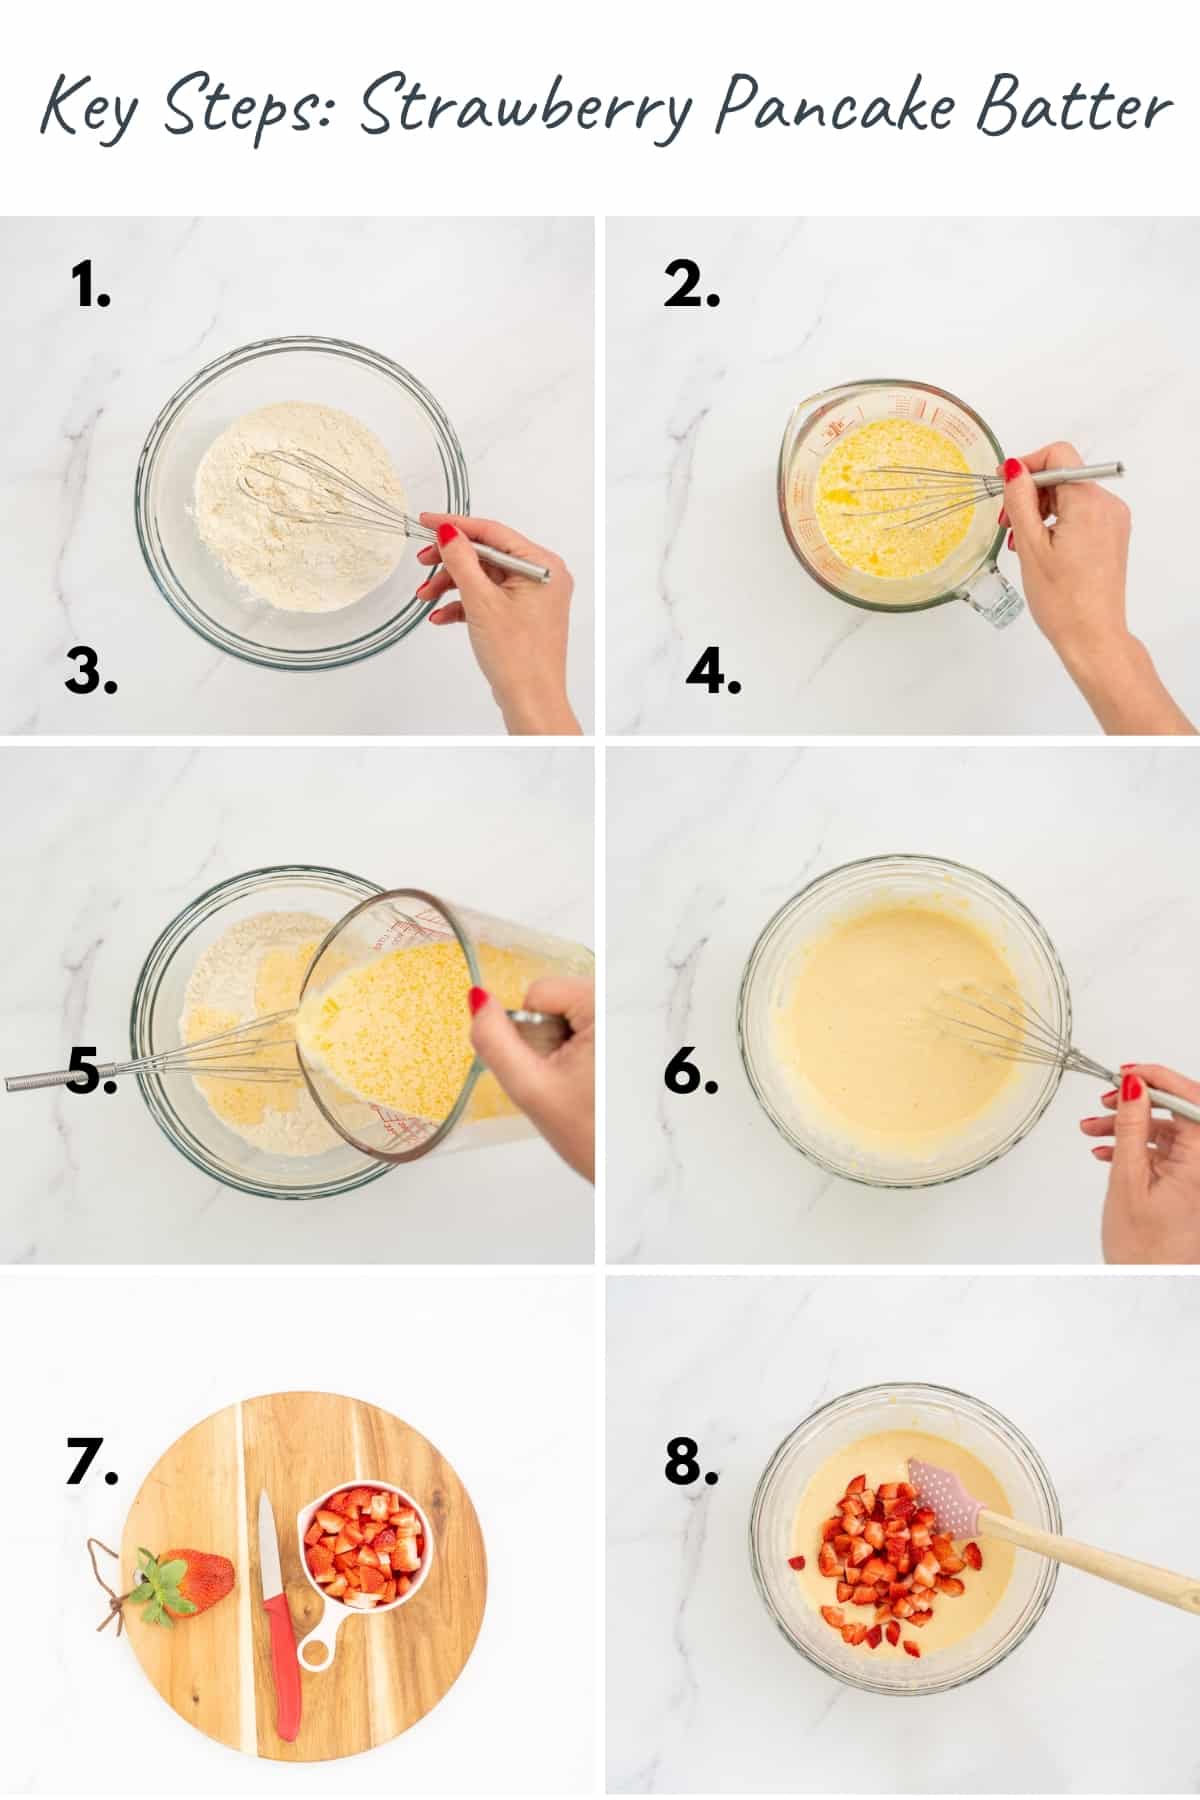 8 photo collage showing the key steps for making strawberry pancake batter. 